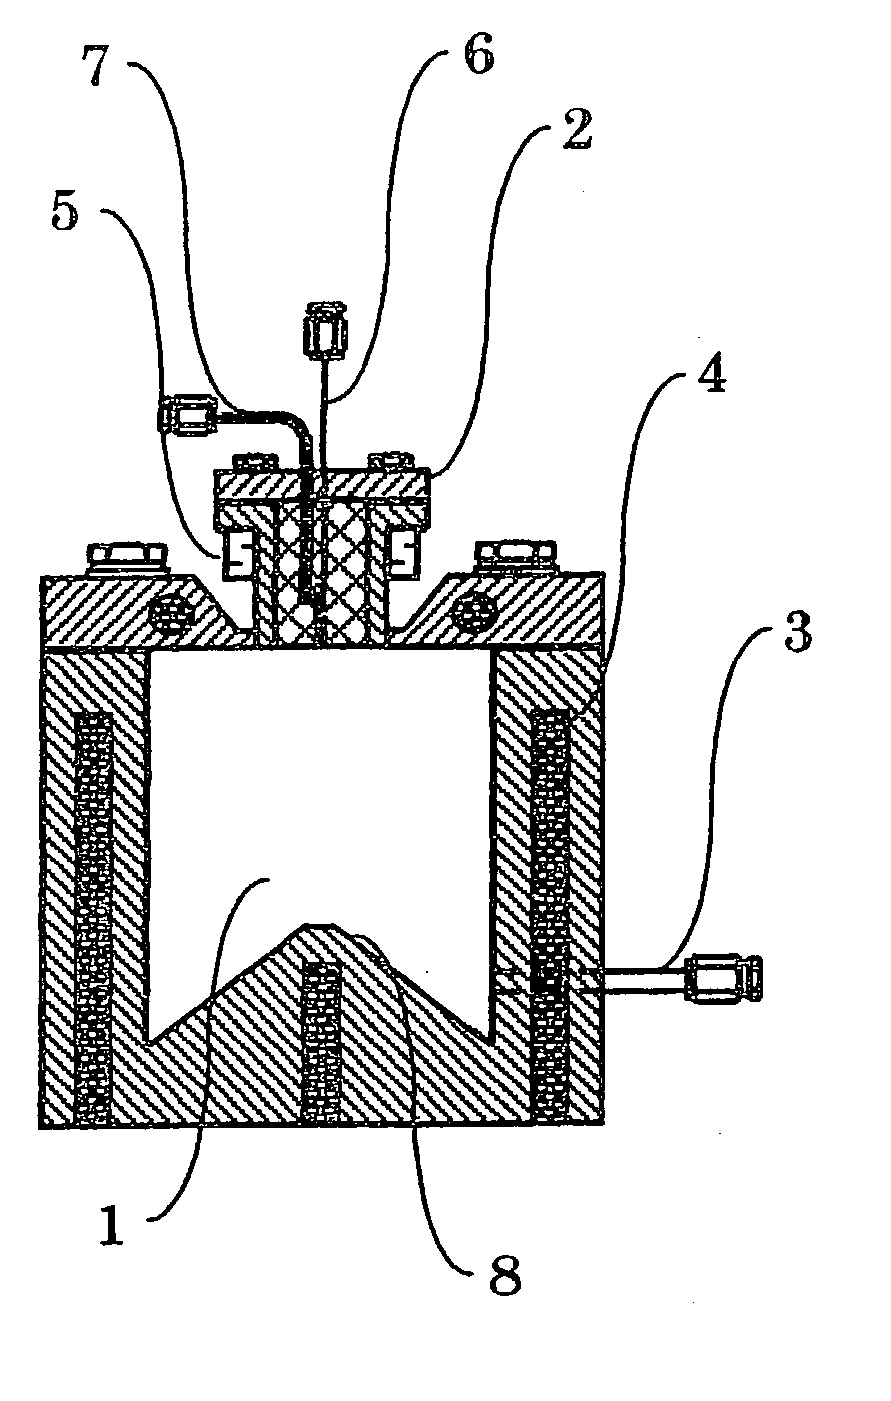 Vaporizer and apparatus for vaporizing and supplying